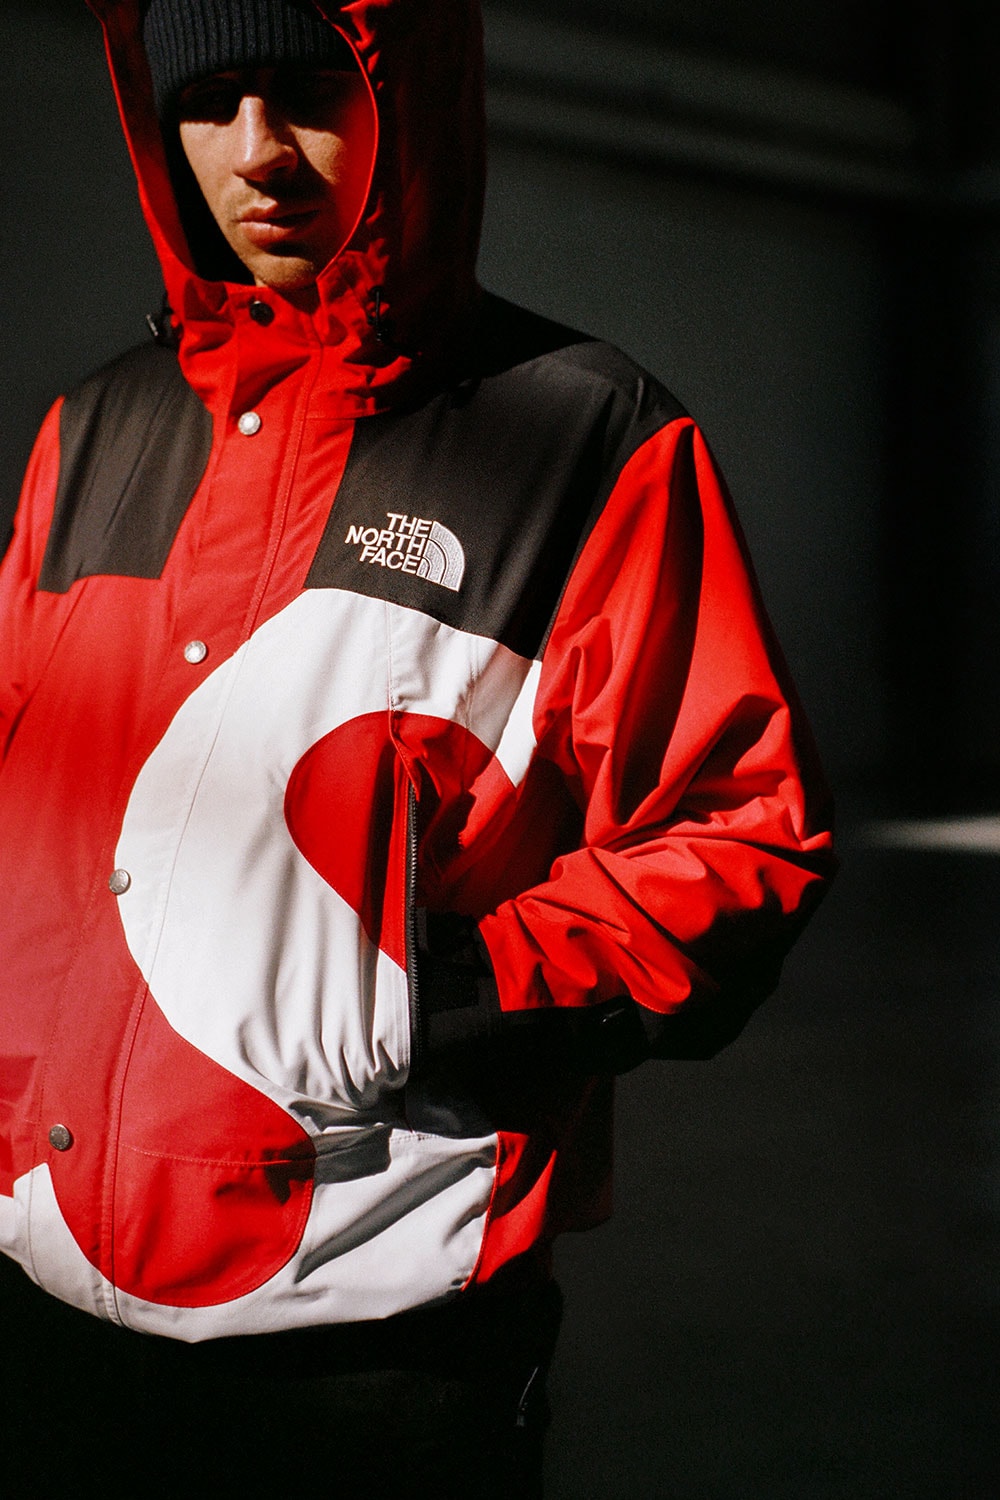 Supreme x The North Face Fall 2020 Collection Info Summit Series Himalayan Parka Mountain Jacket Hooded Fleece Jacket Expedition Backpack Shoulder Bag Dolomite 3S-20° Sleeping Bag Nuptse Mitts